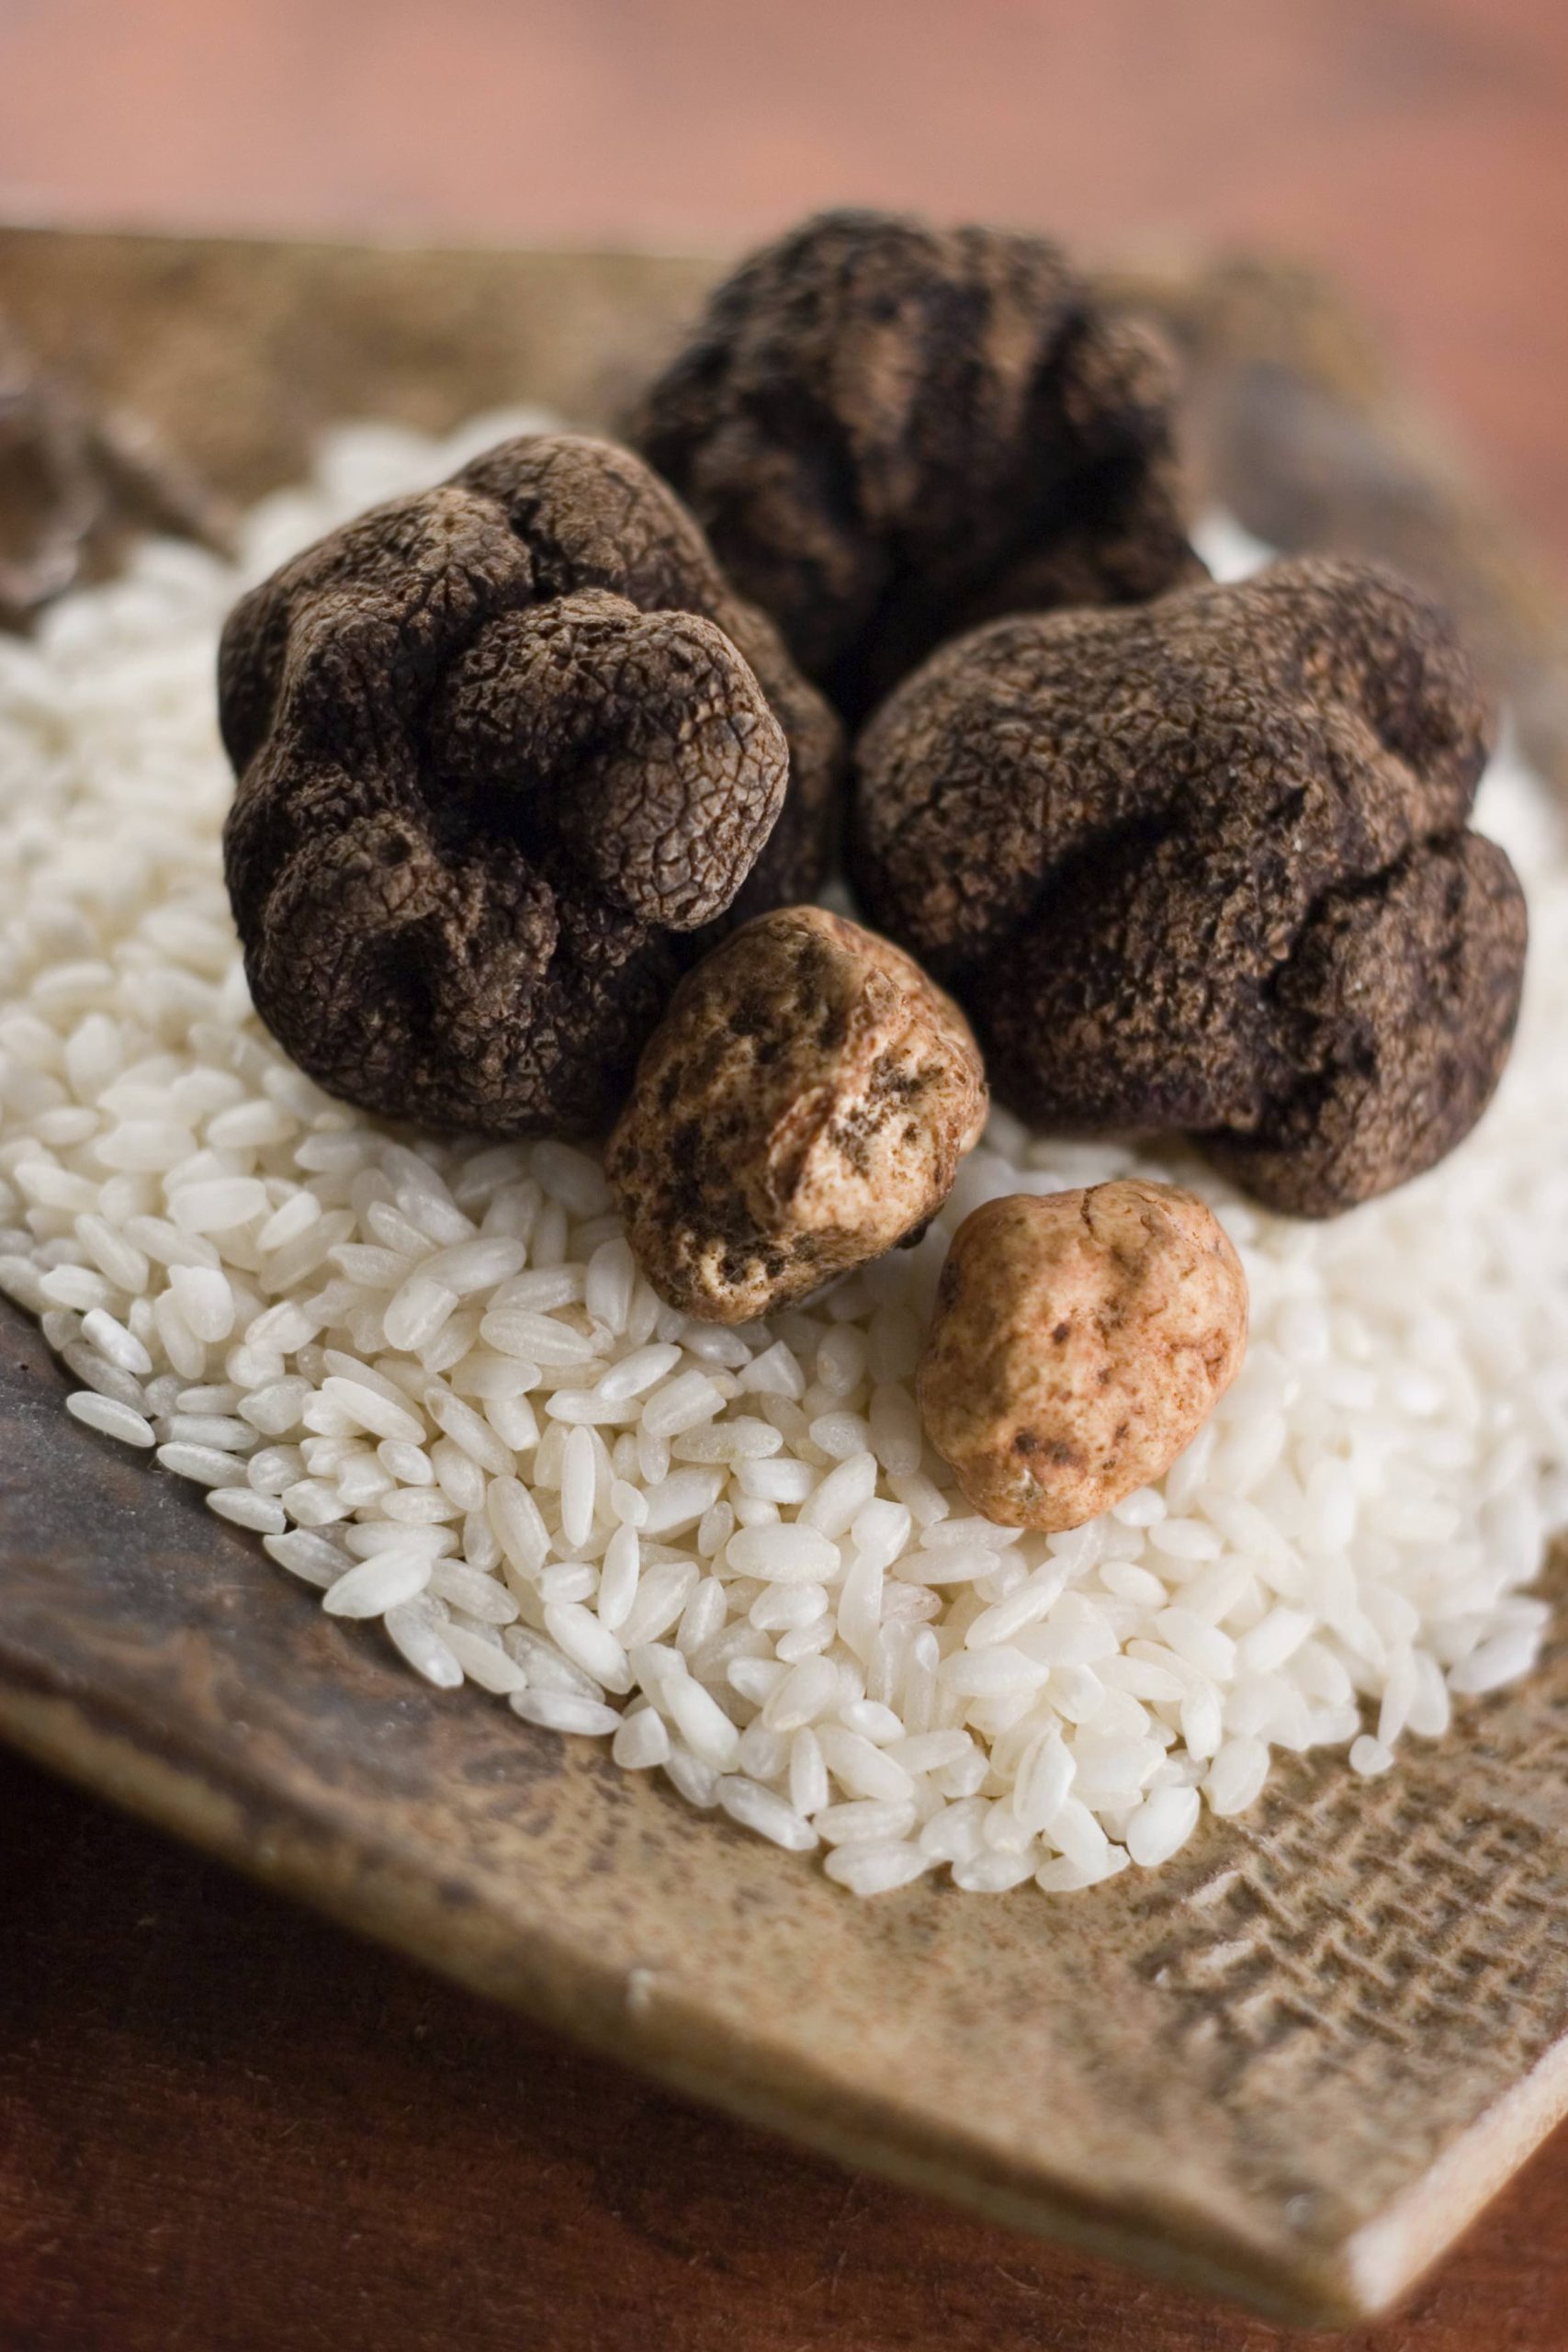 The real deal, Perigord and Piedmont Truffles together nestled on a bed of Abrborio rice.